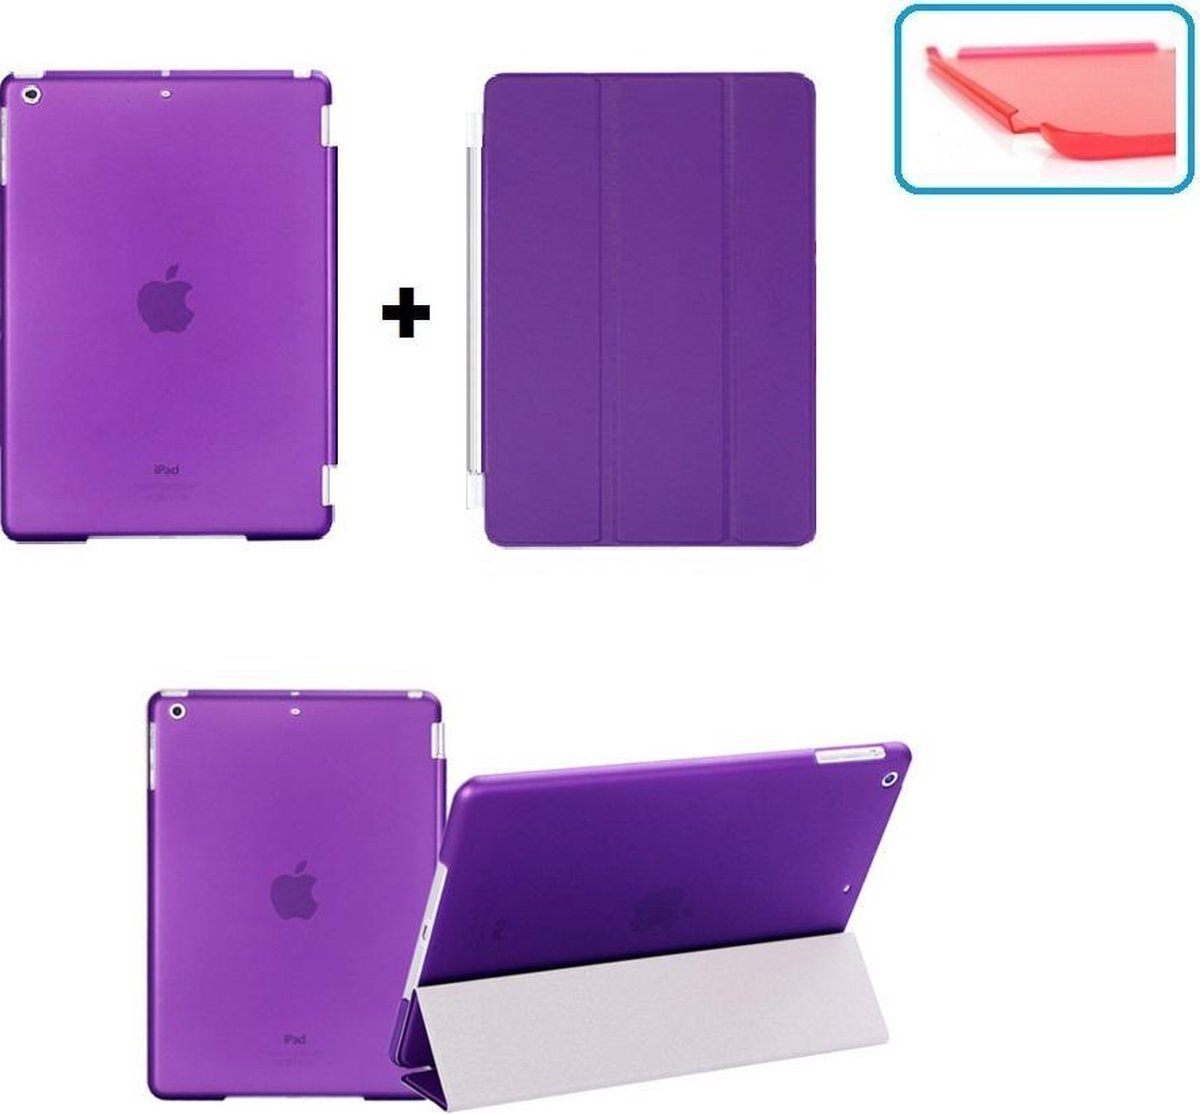 Apple iPad Air 2 Smart Cover Hoes - inclusief achterkant - Paars